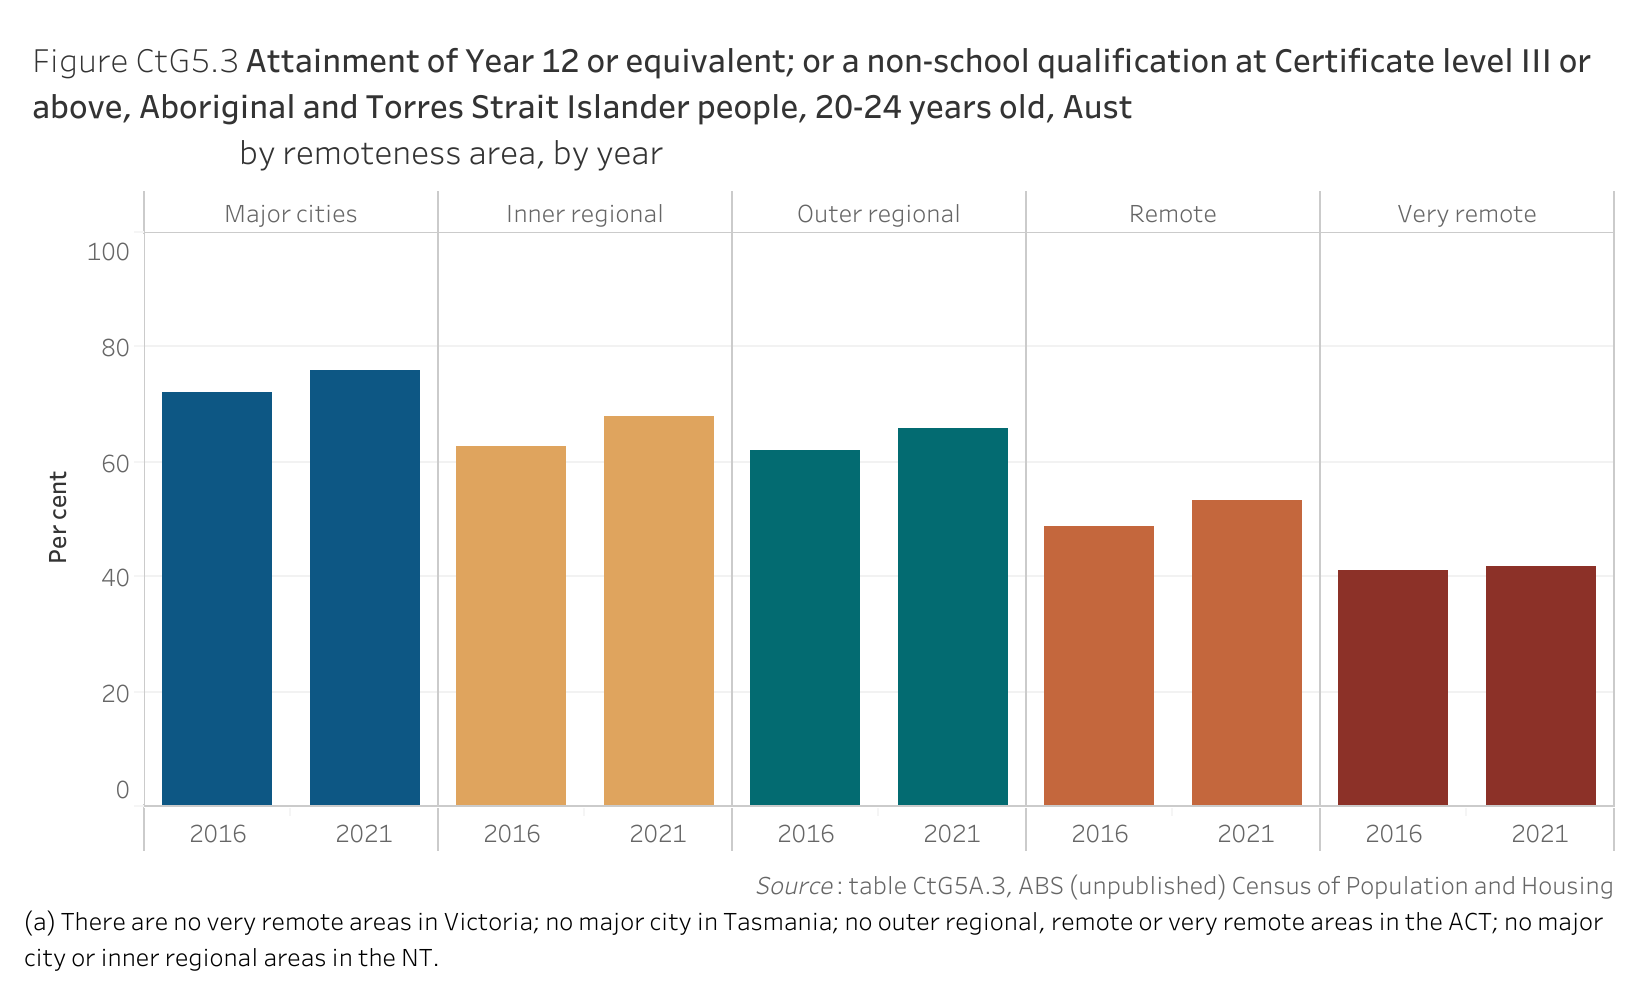 Figure CtG5.3 shows the attainment of Year 12 or equivalent; or a non-school qualification at Certificate level III or above, Aboriginal and Torres Strait Islander people, 20-24 years old, Australia, by remoteness area, by year. More details can be found within the text near this image.